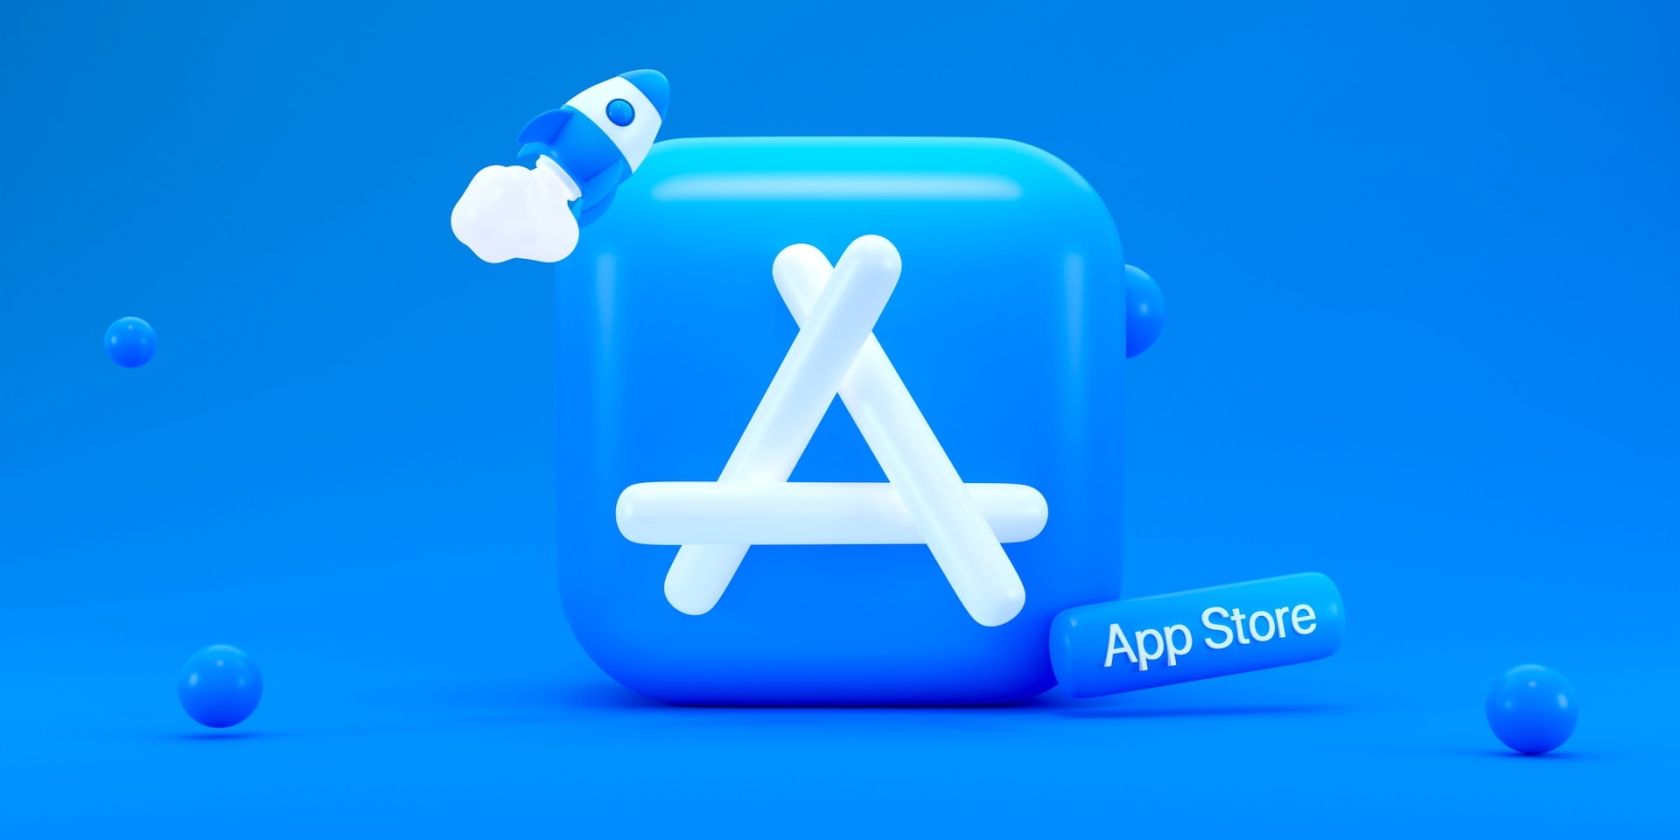 App Store icon with a rocket